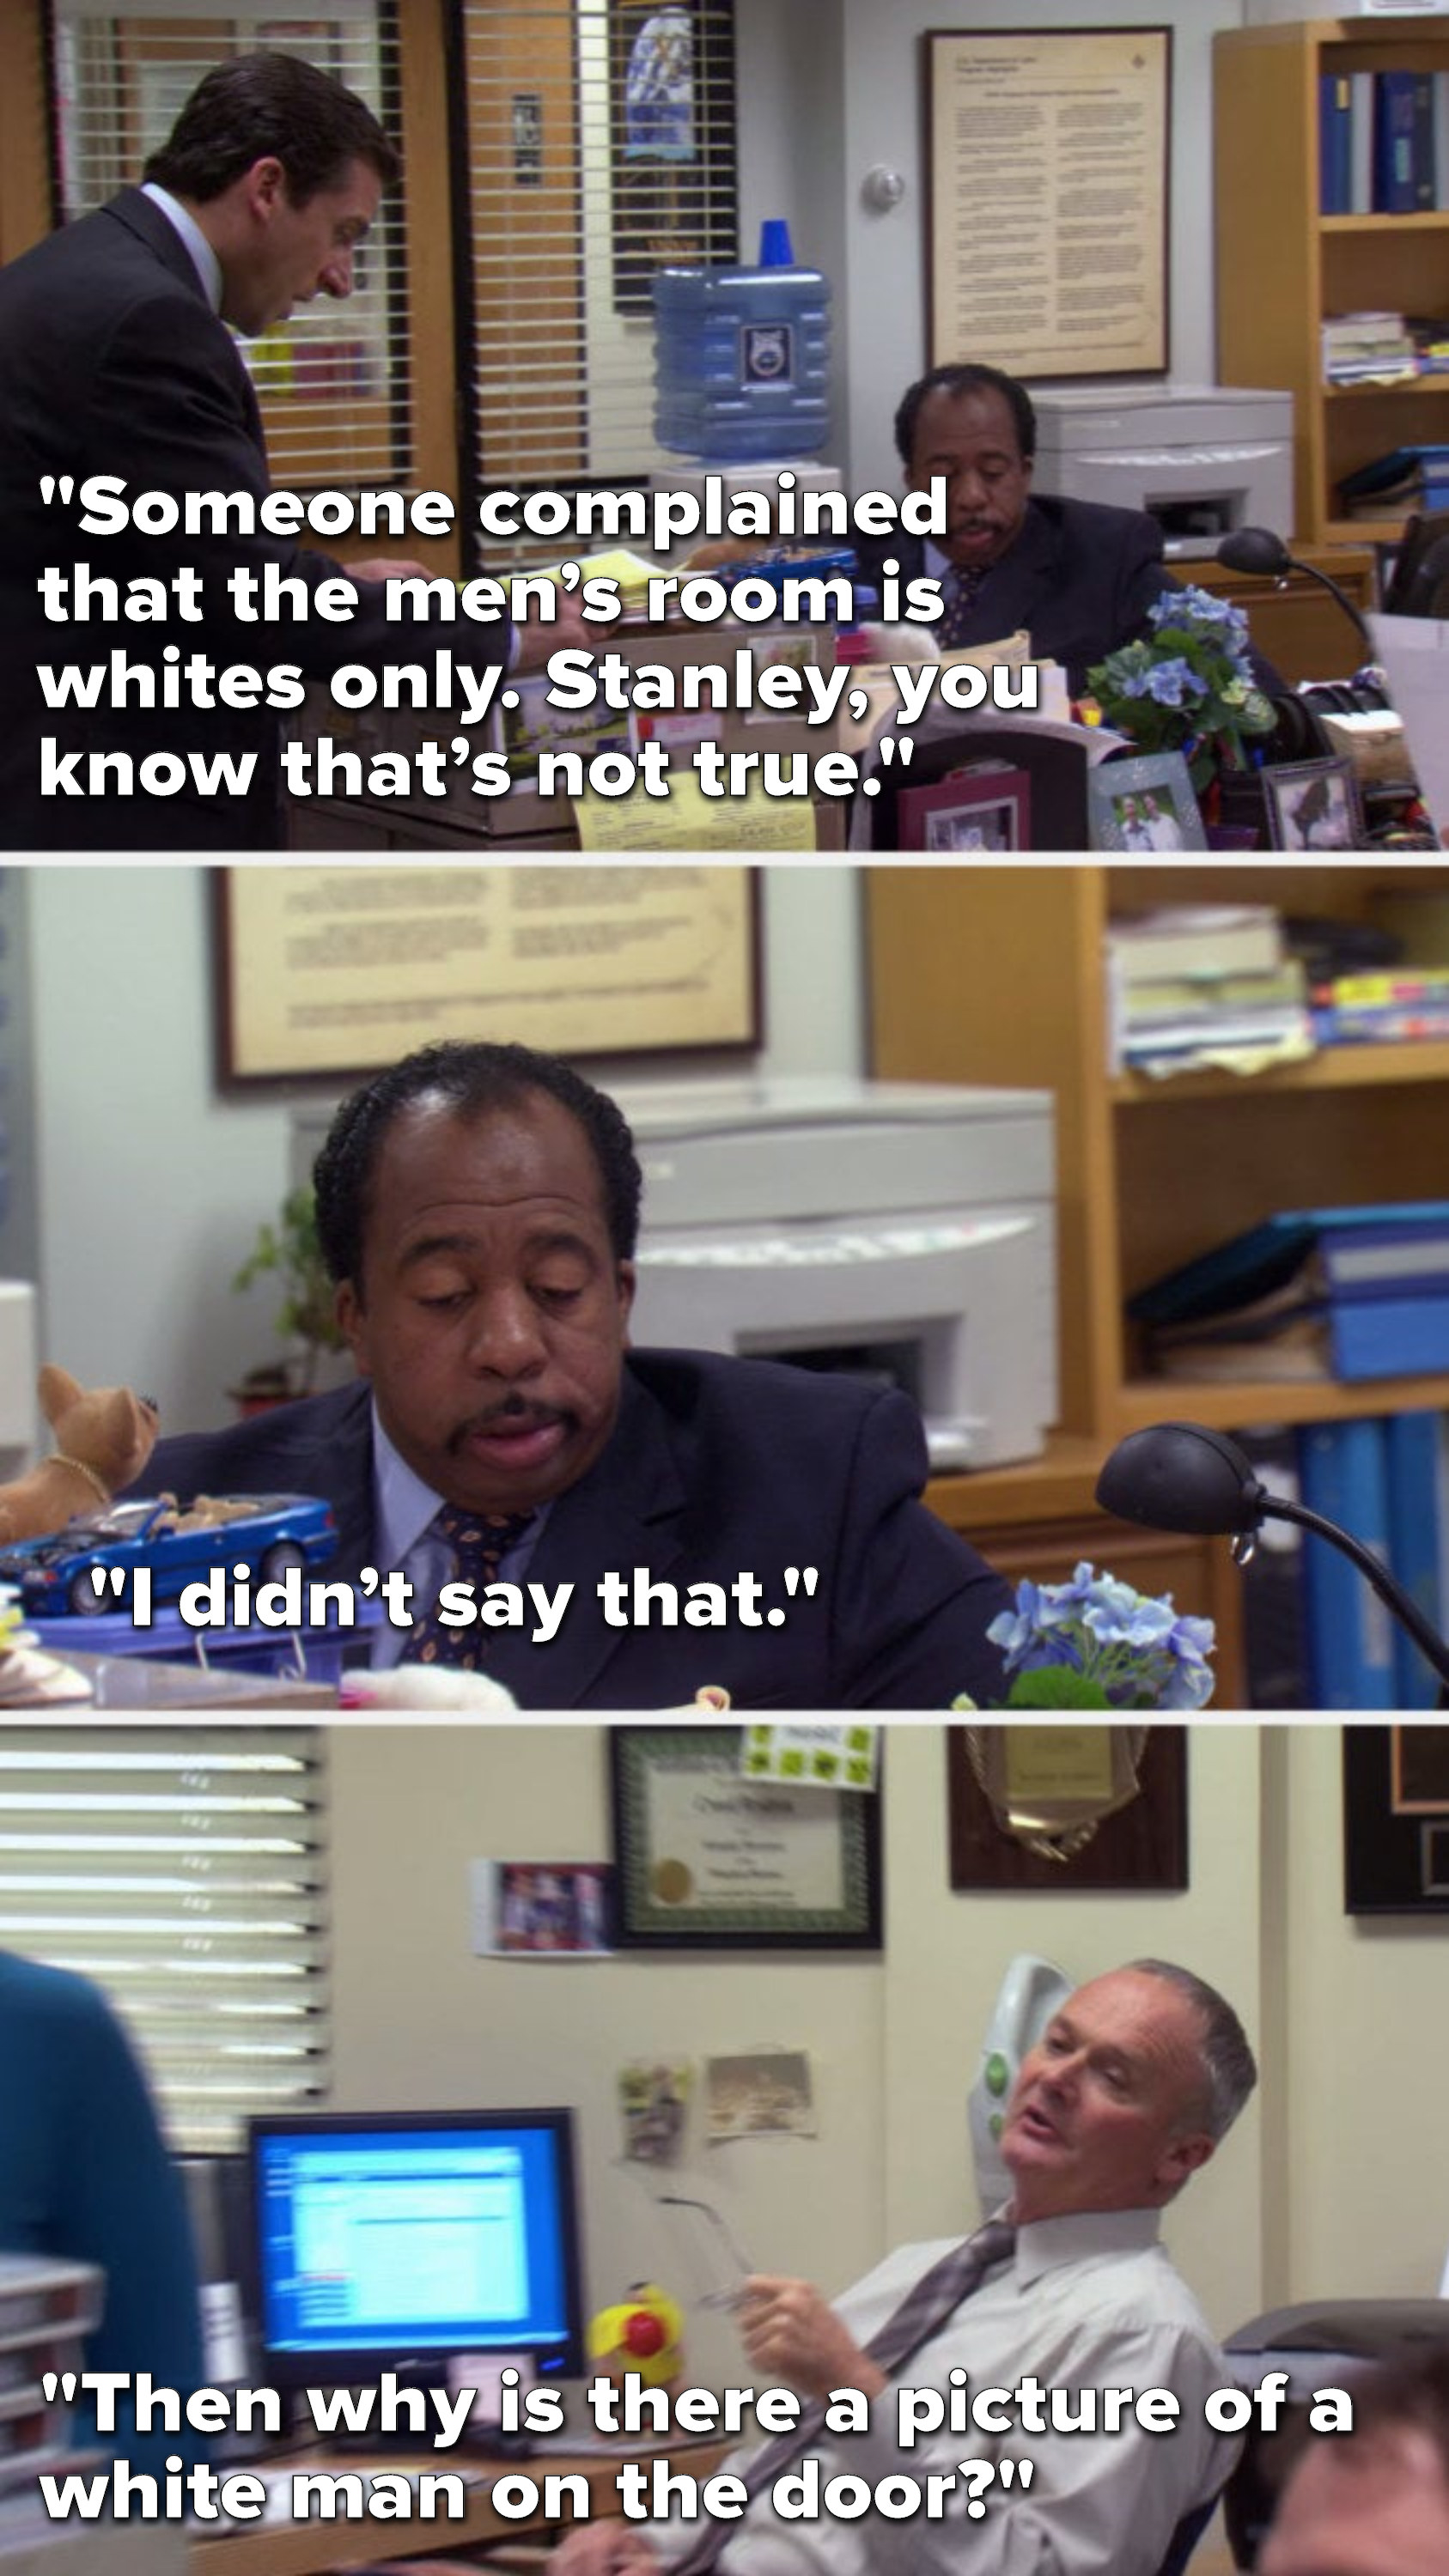 Michael says, &quot;Someone complained that the men’s room is whites only, Stanley, you know that’s not true,&quot; Stanley says, &quot;I didn’t say that&quot; and Creed says, &quot;Then why is there a picture of a white man on the door&quot;